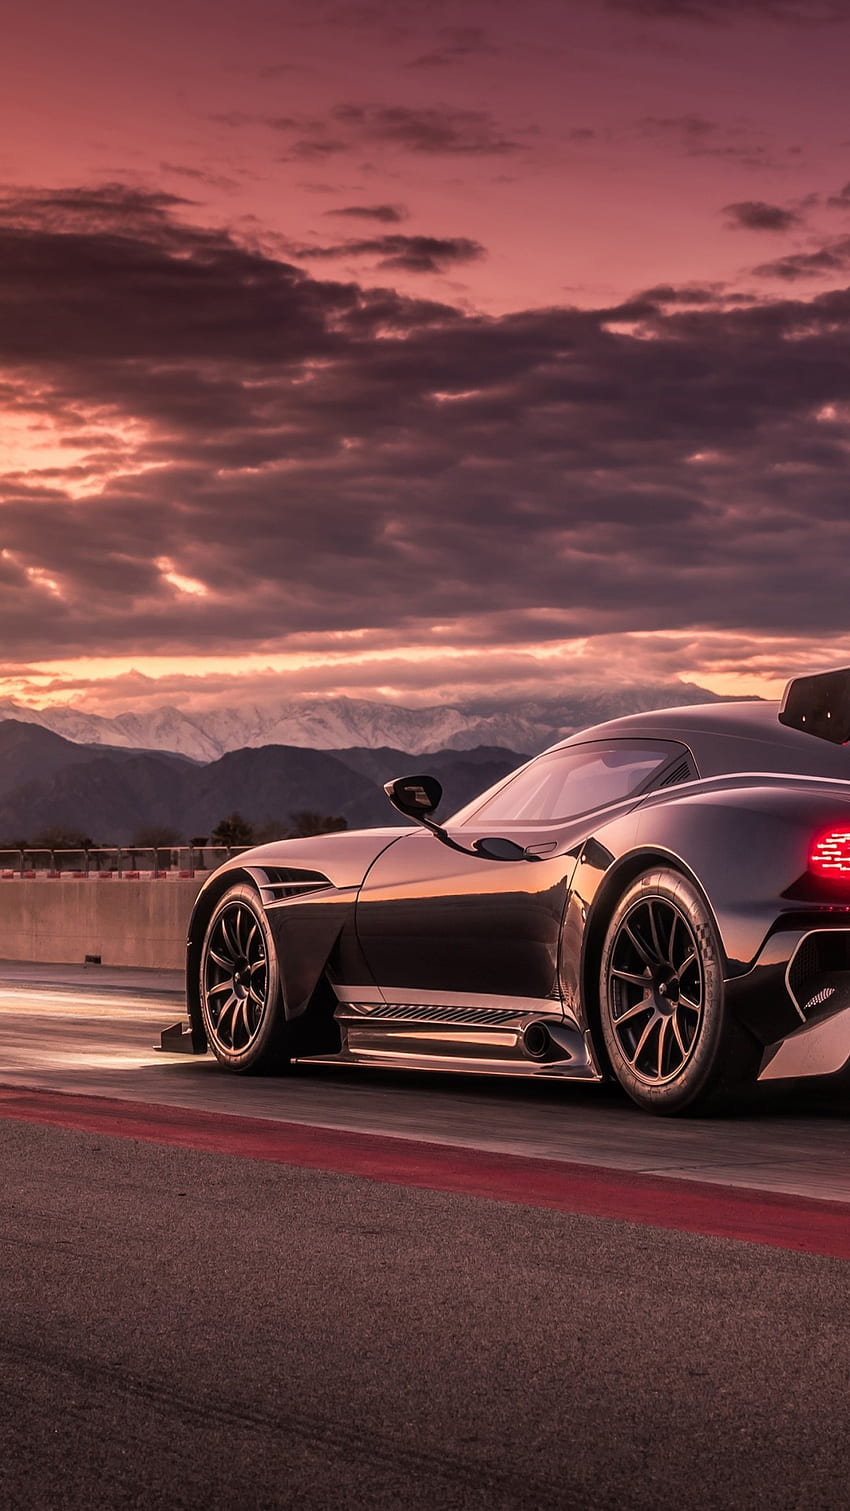 Aston Martin Vulcan, Sunset, Road, Supercar, Cars for iPhone 8, iPhone 7 Plus, iPhone 6+, Sony Xperia Z, HTC One - Maiden, 1080x1920 Car HD phone wallpaper